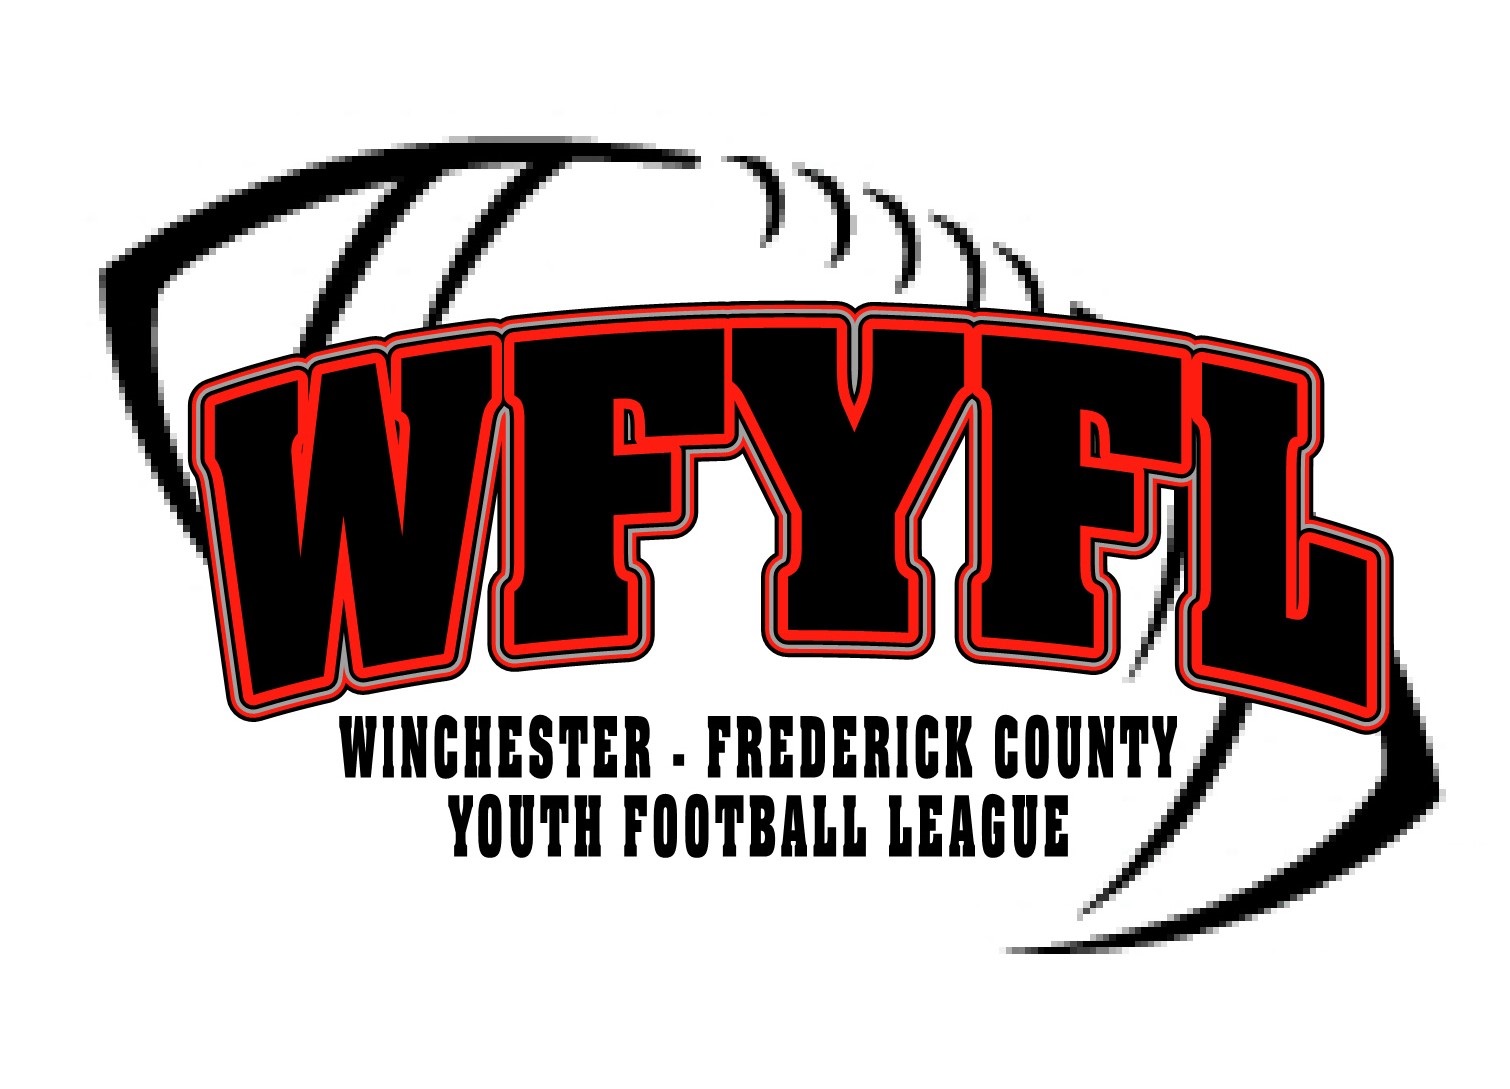 Winchester Frederick County Youth Football League